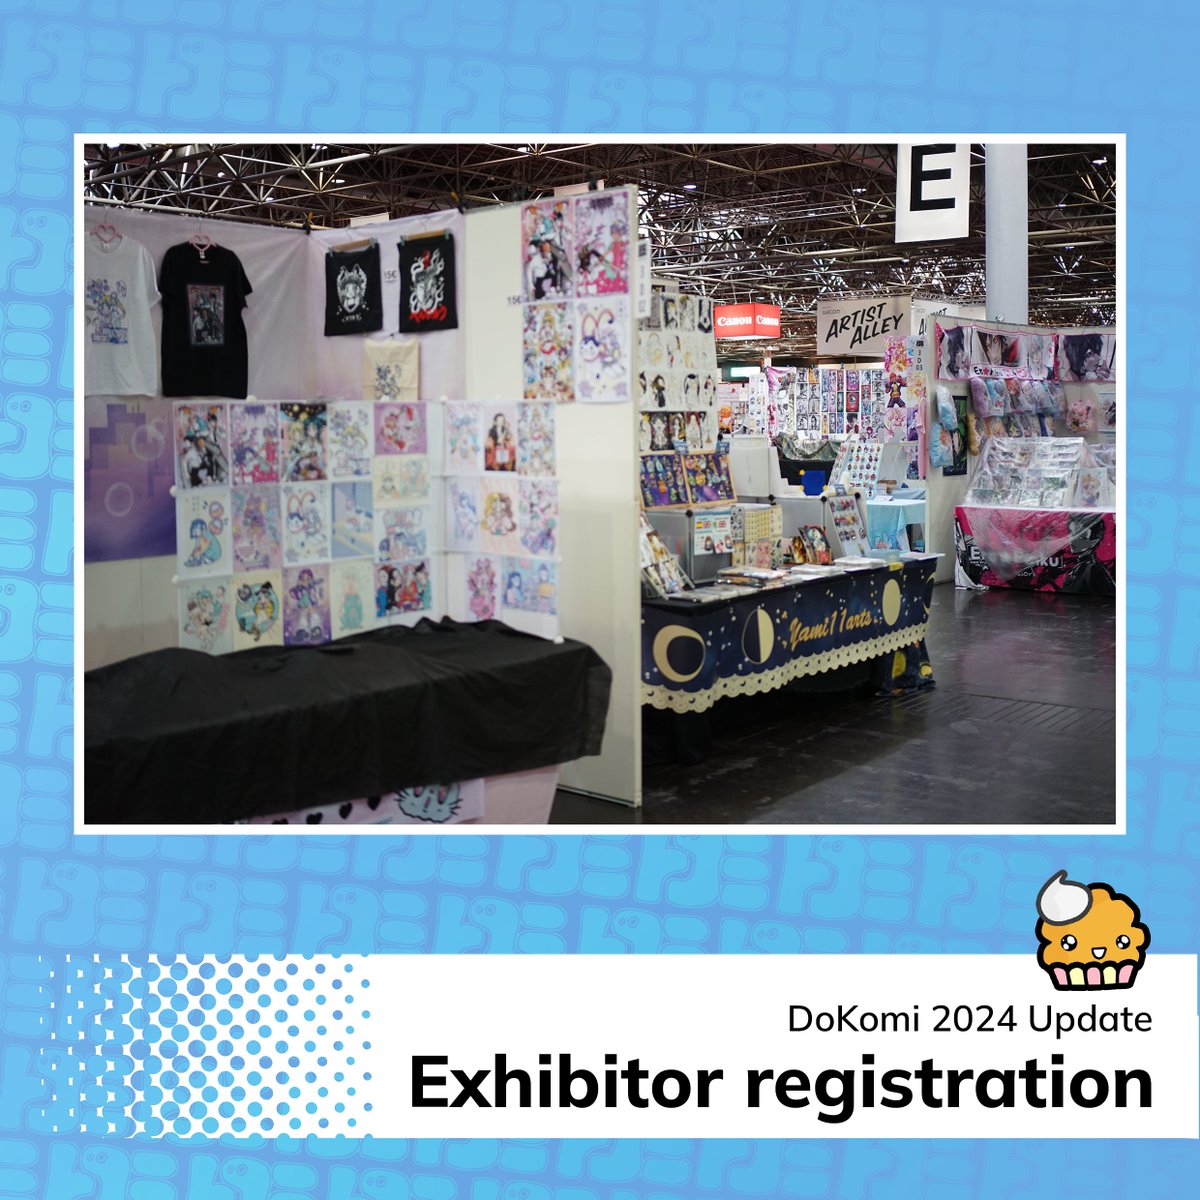 DoKomi 2024 Update We have decided to postpone the start of registration for exhibitors, fan stands and artists. The end time of the application phases will also be moved back: Fan stands & artists: Dec 1, 2023, 8:00 p.m. - Dec 31 Exhibitors: 01.12.2023, 8:00 p.m - 29.02.2024